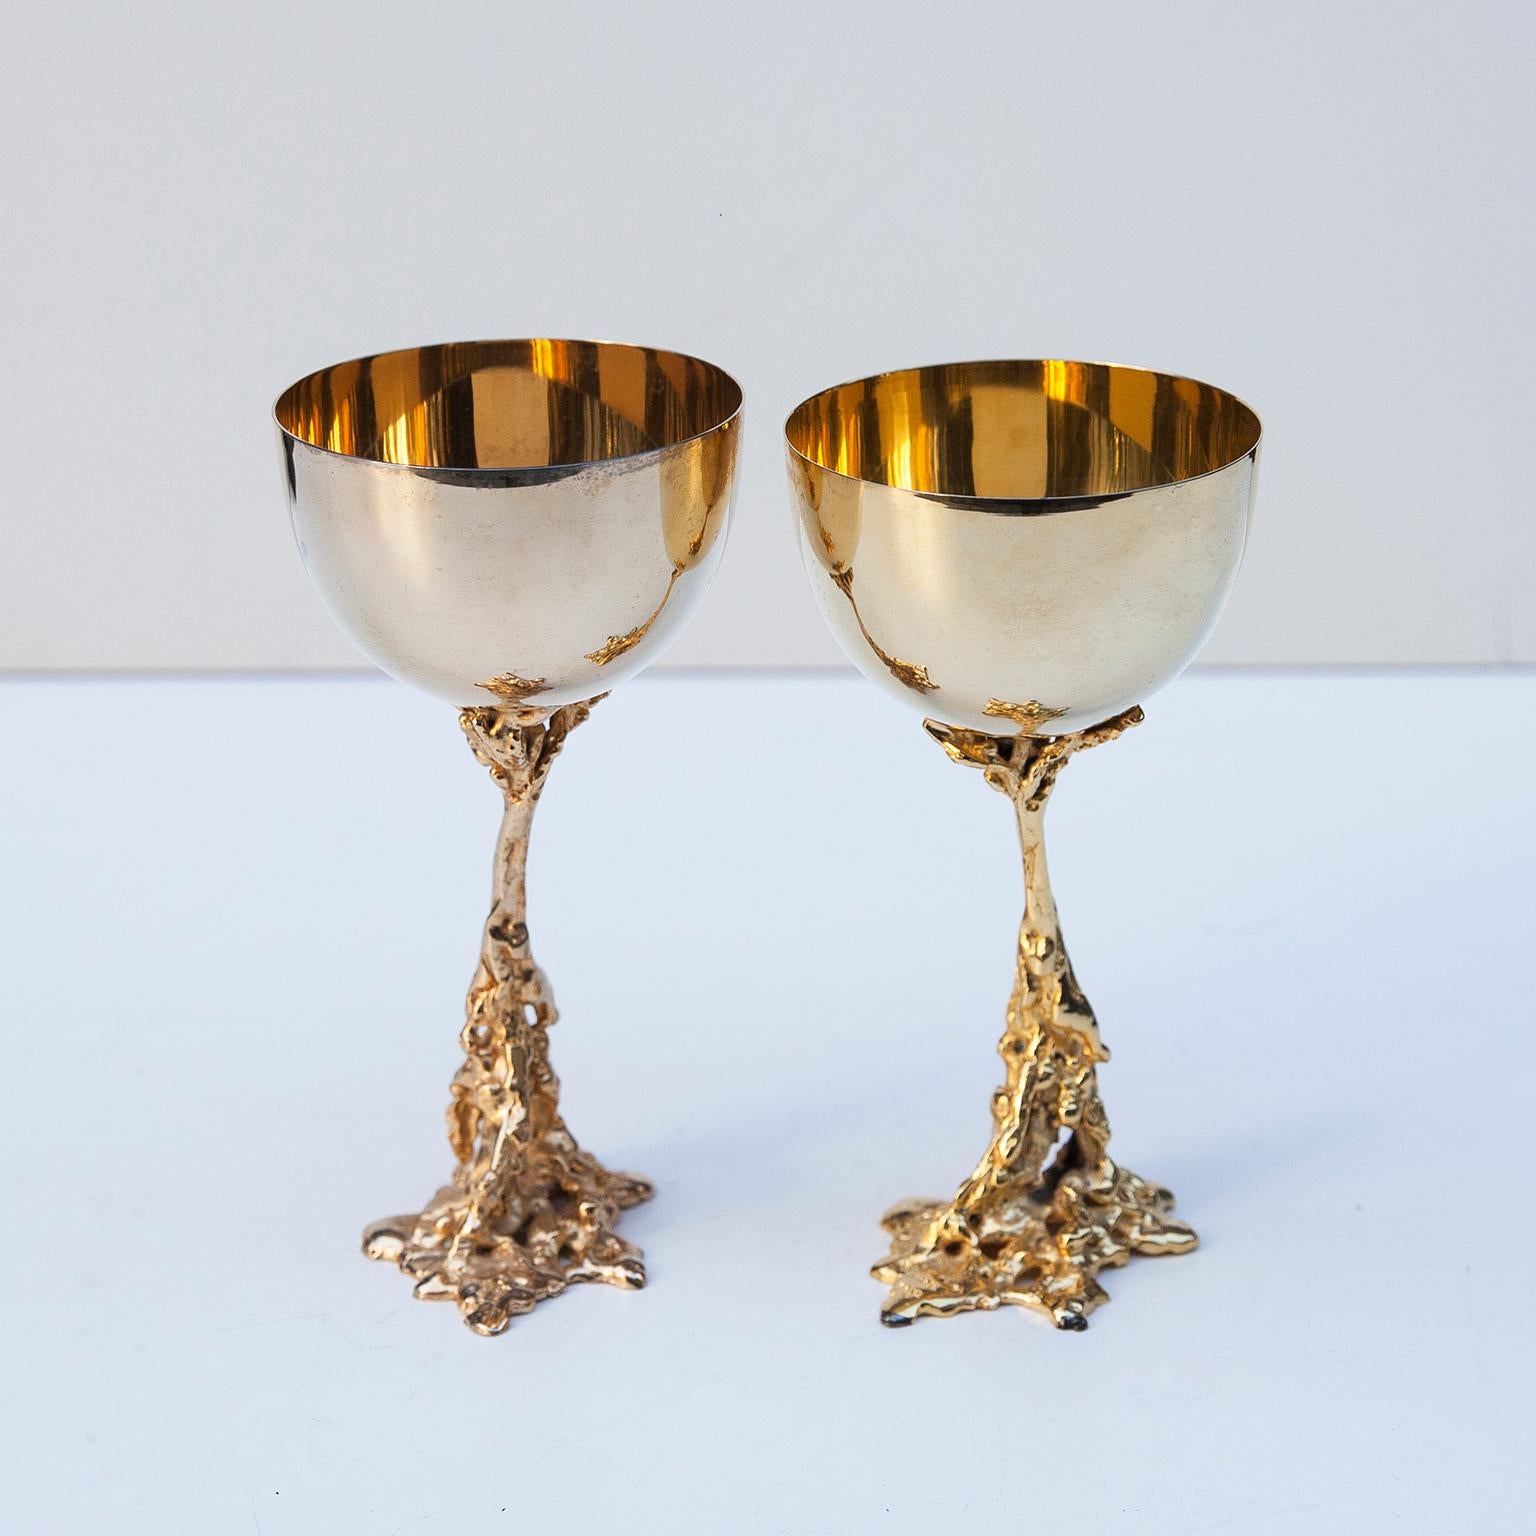 Gorgeous detailed gold-plated bronze wine cup sculptures by Gabriella Crespi from the 1970s. Signed on the bottom. This piece is in excellent condition.

 